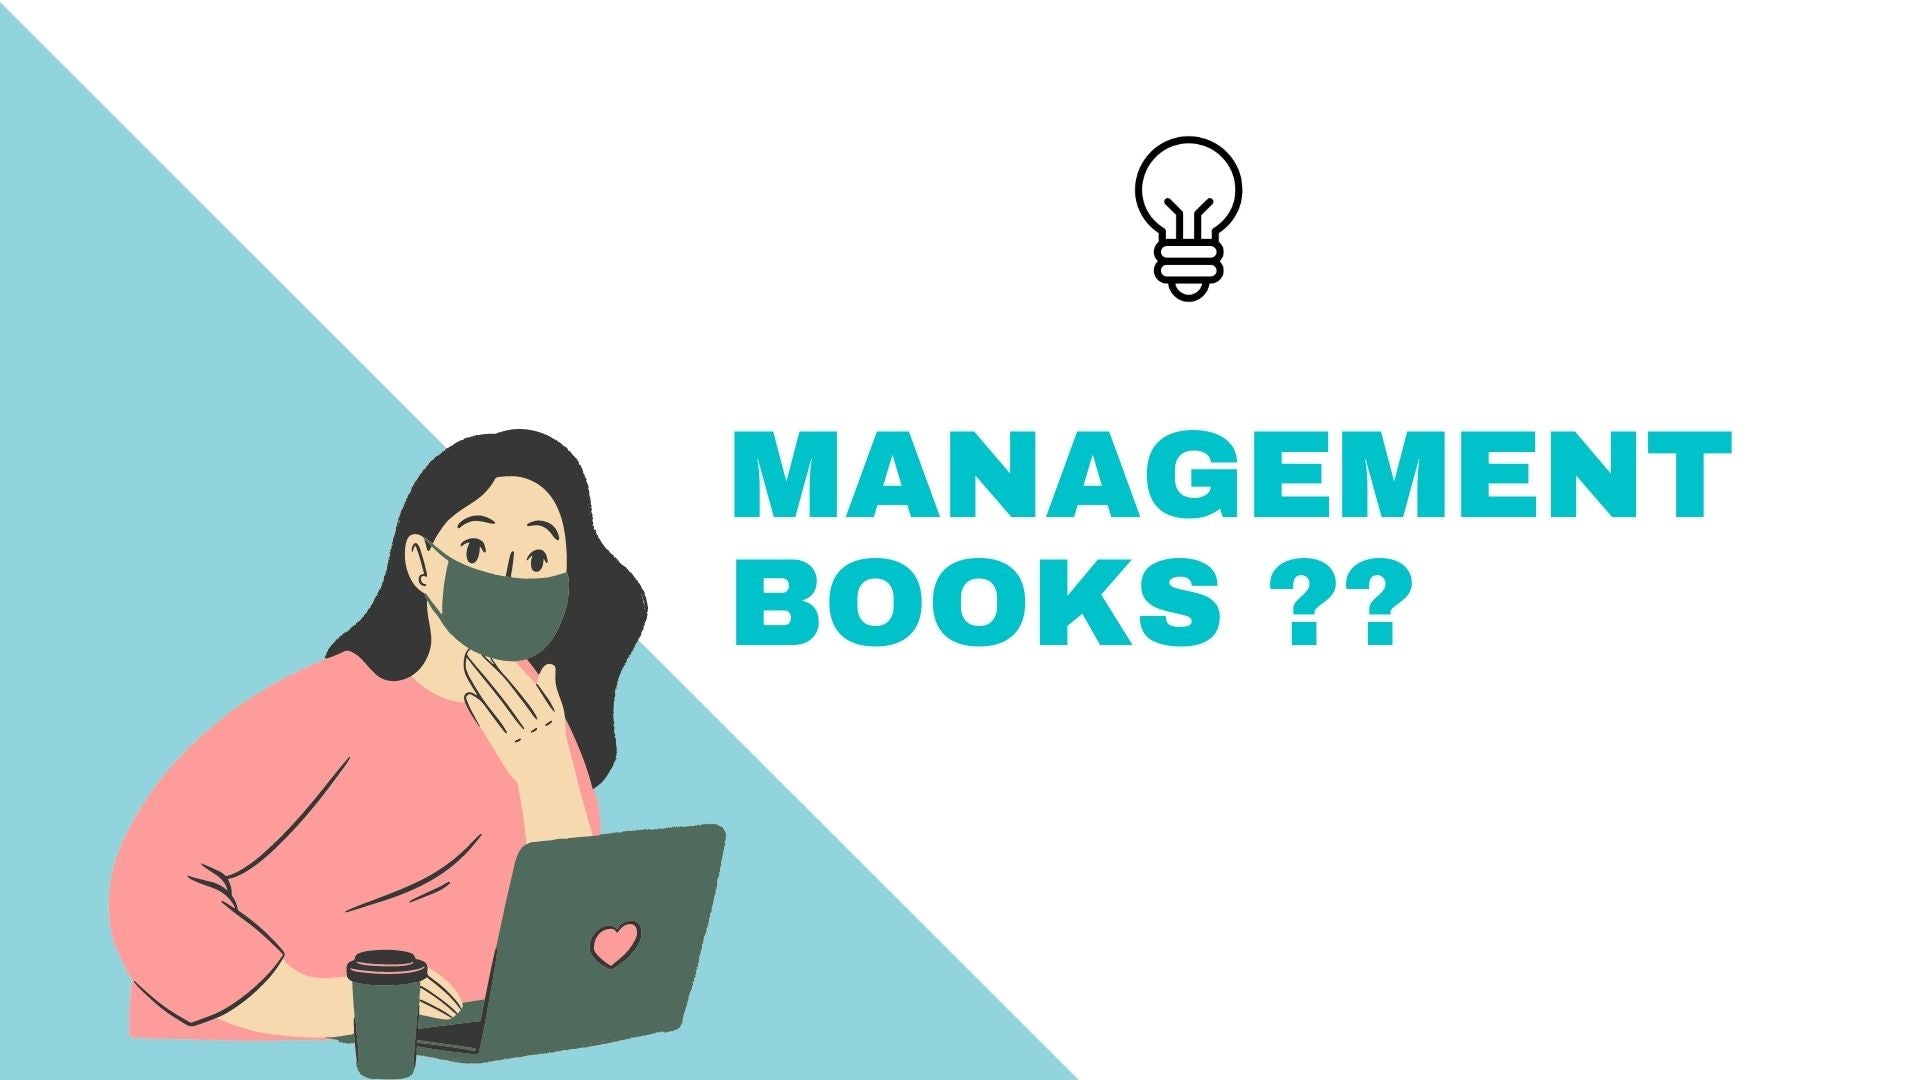 Load video: Our Self-Learning Management series is curated to make your learning process a piece of cake.   We offer affordable and exhaustive textbooks written by experts that are liked by Professors, librarians, bloggers, and influencers!